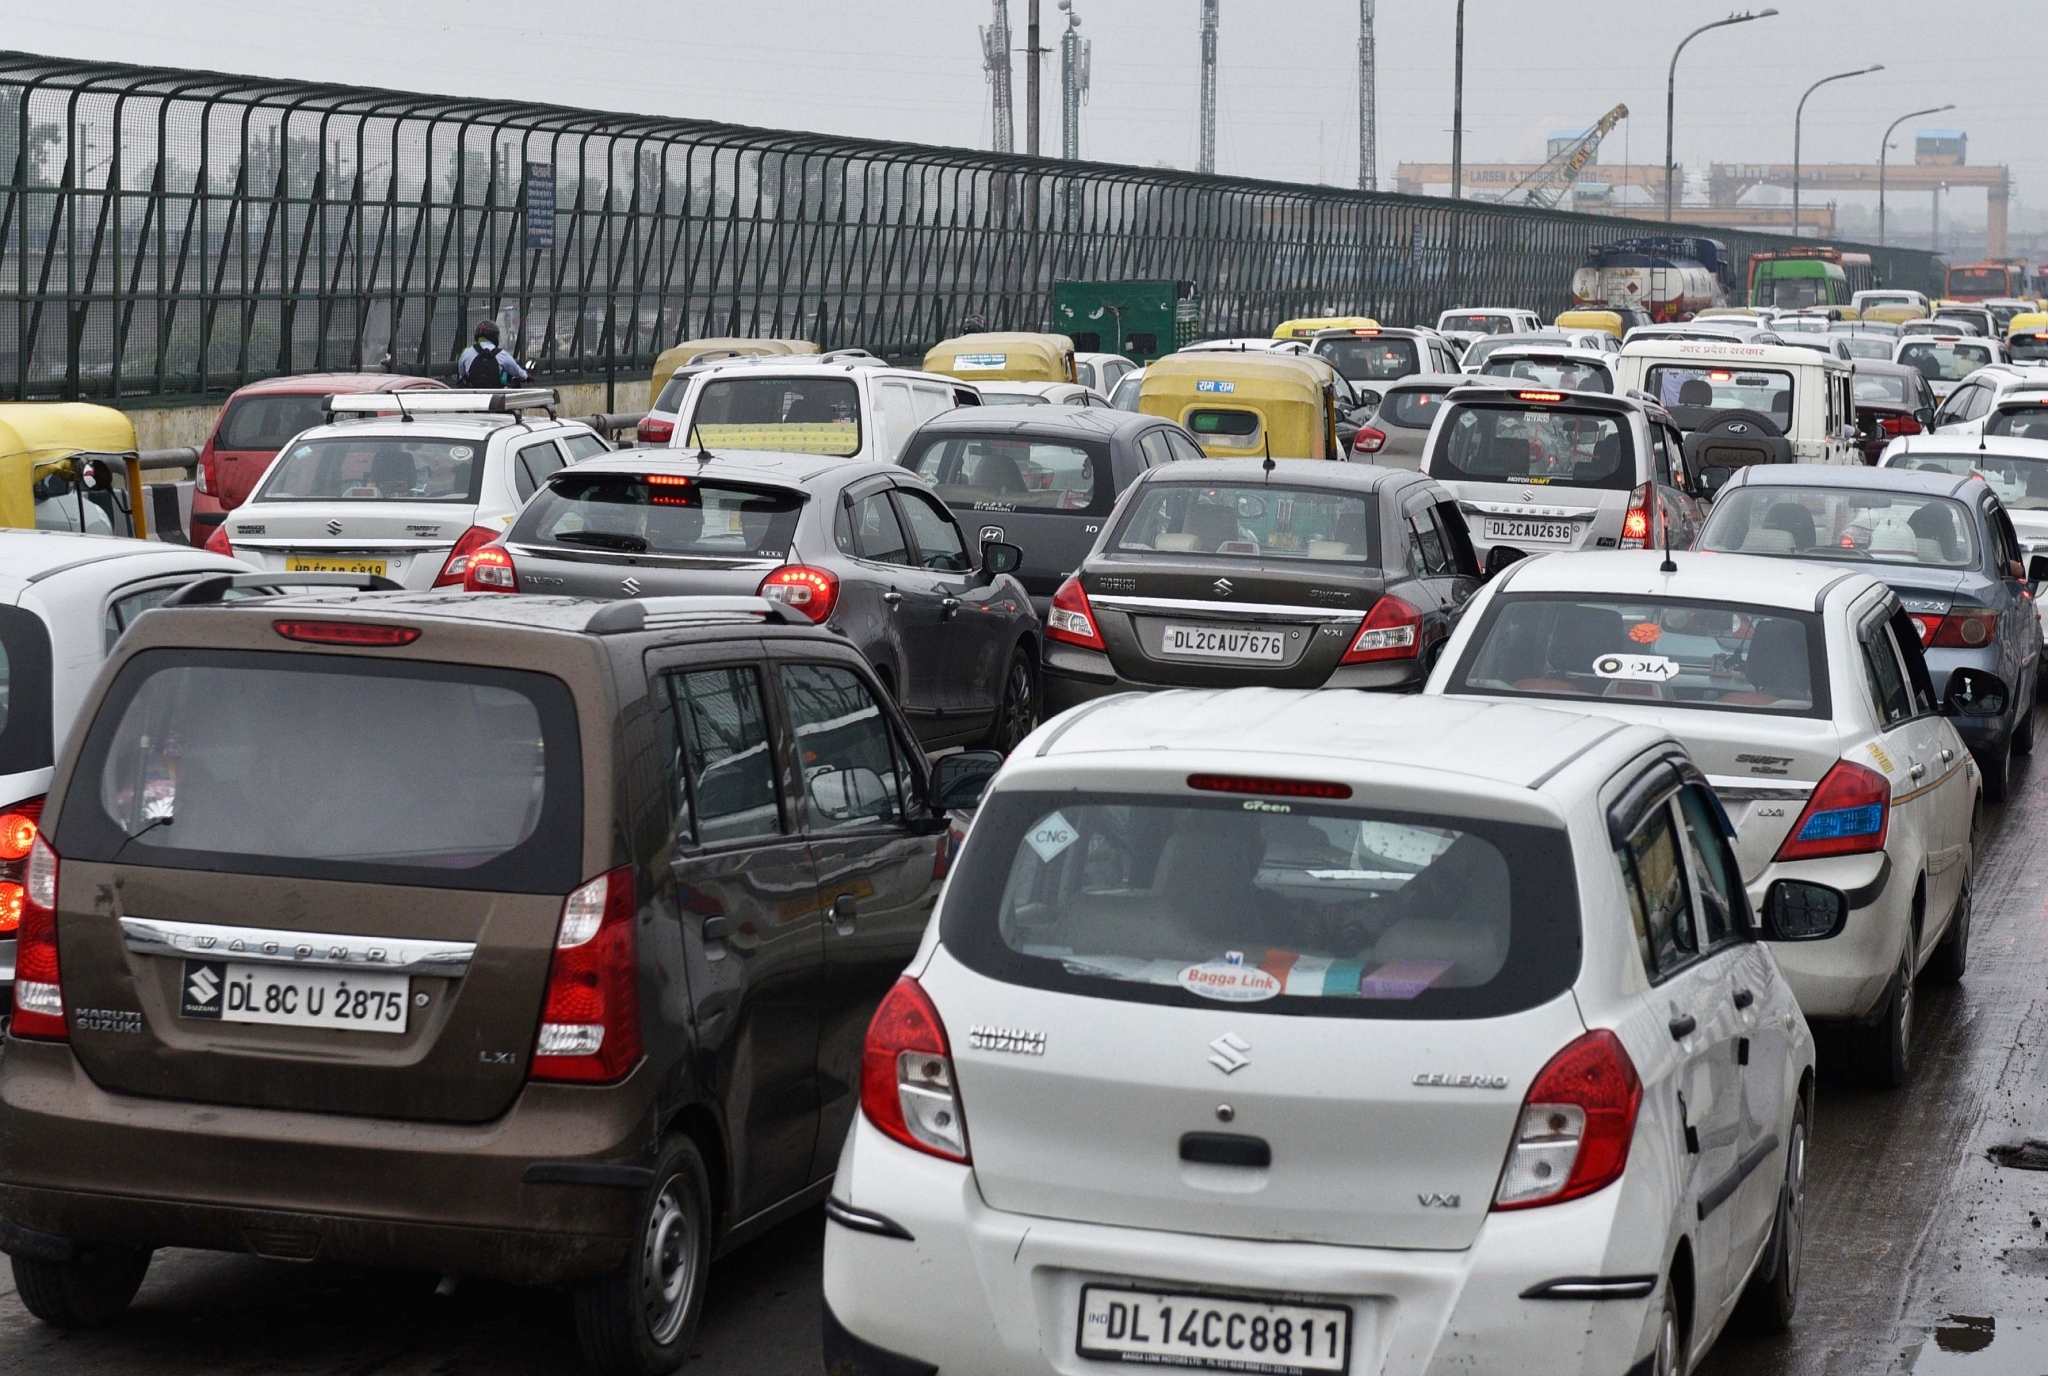 Massive traffic congestion is one reason why people in urban areas are buying less number of vehicles. (Mohd Zakir/Hindustan Times via Getty Images)